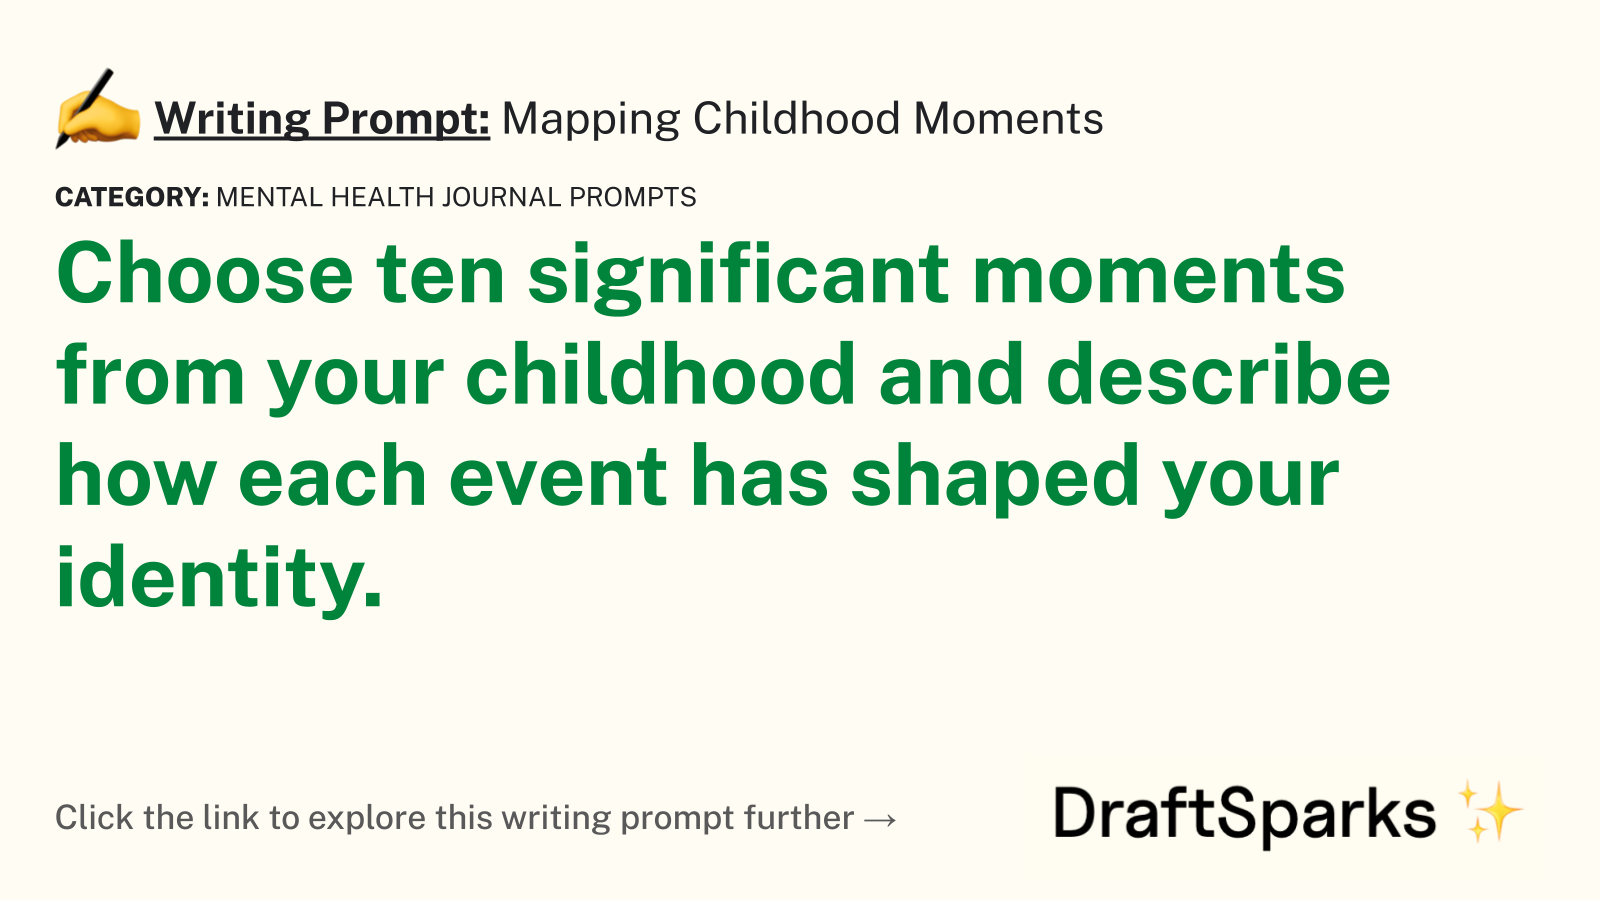 Mapping Childhood Moments